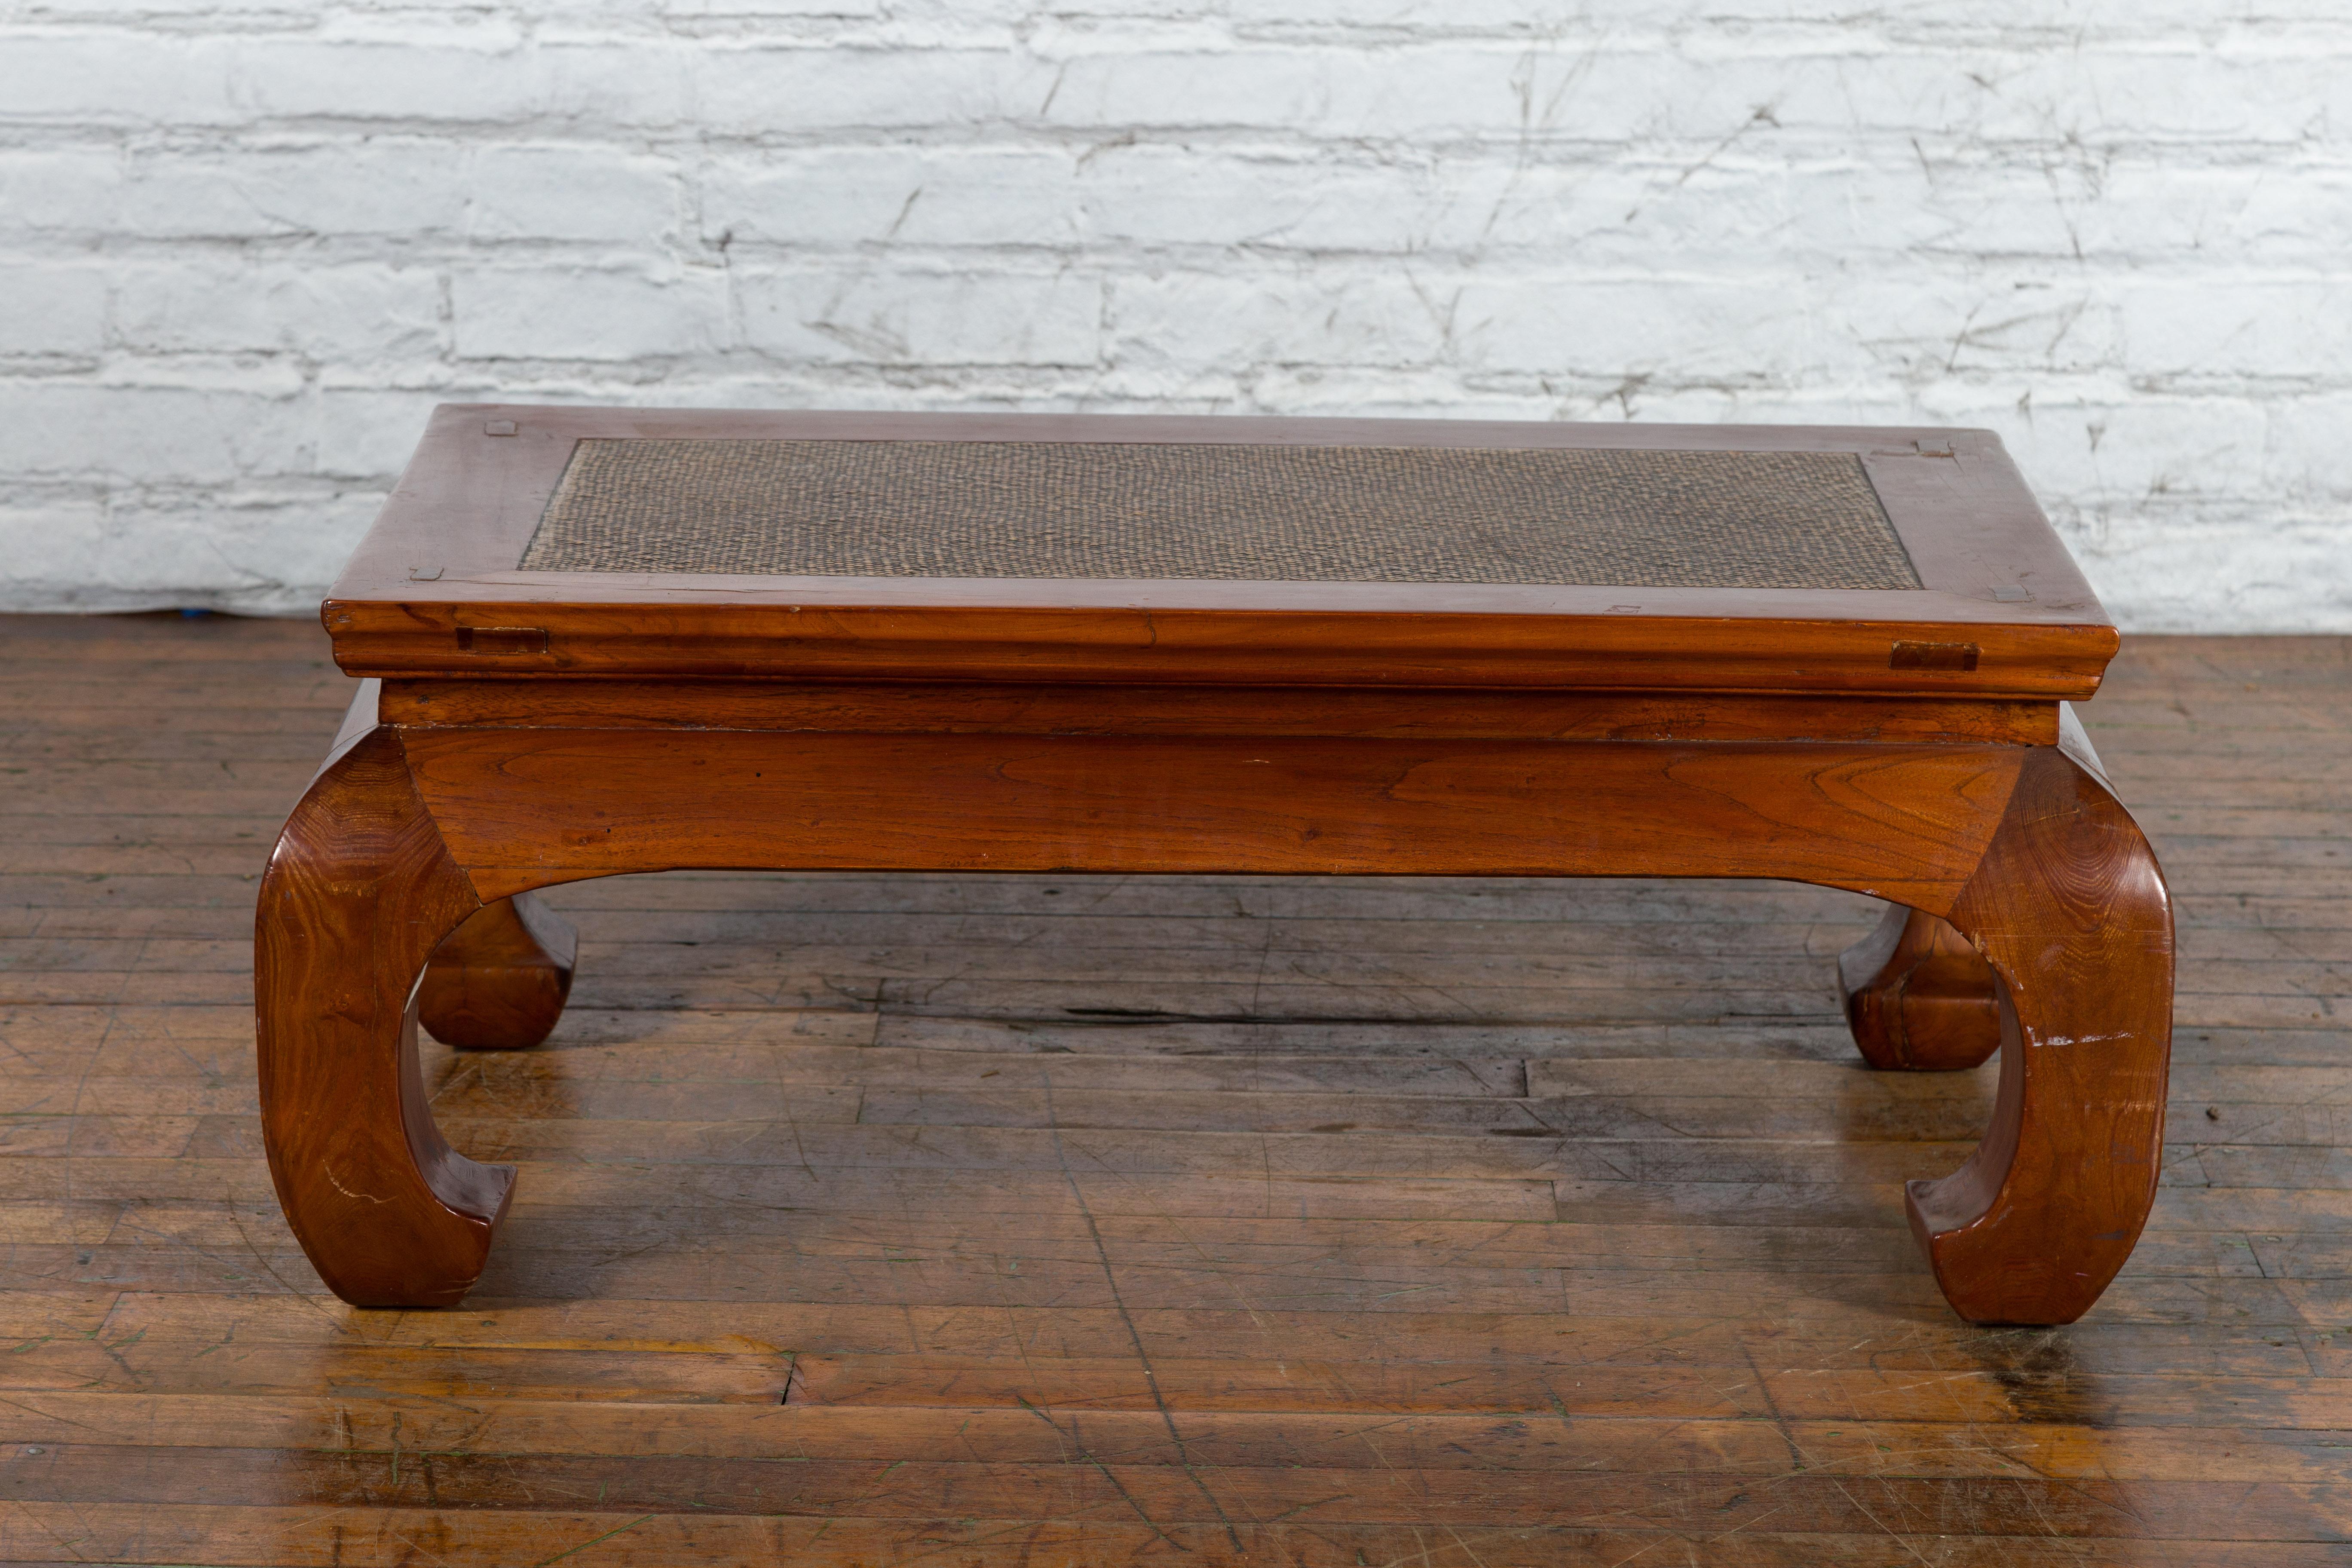 An antique Chinese Qing Dynasty period wooden brown coffee table from the 19th century, with woven rattan top and chow legs. Created in China during the Qing Dynasty in the 19th century, this brown wood coffee table features a rectangular top with